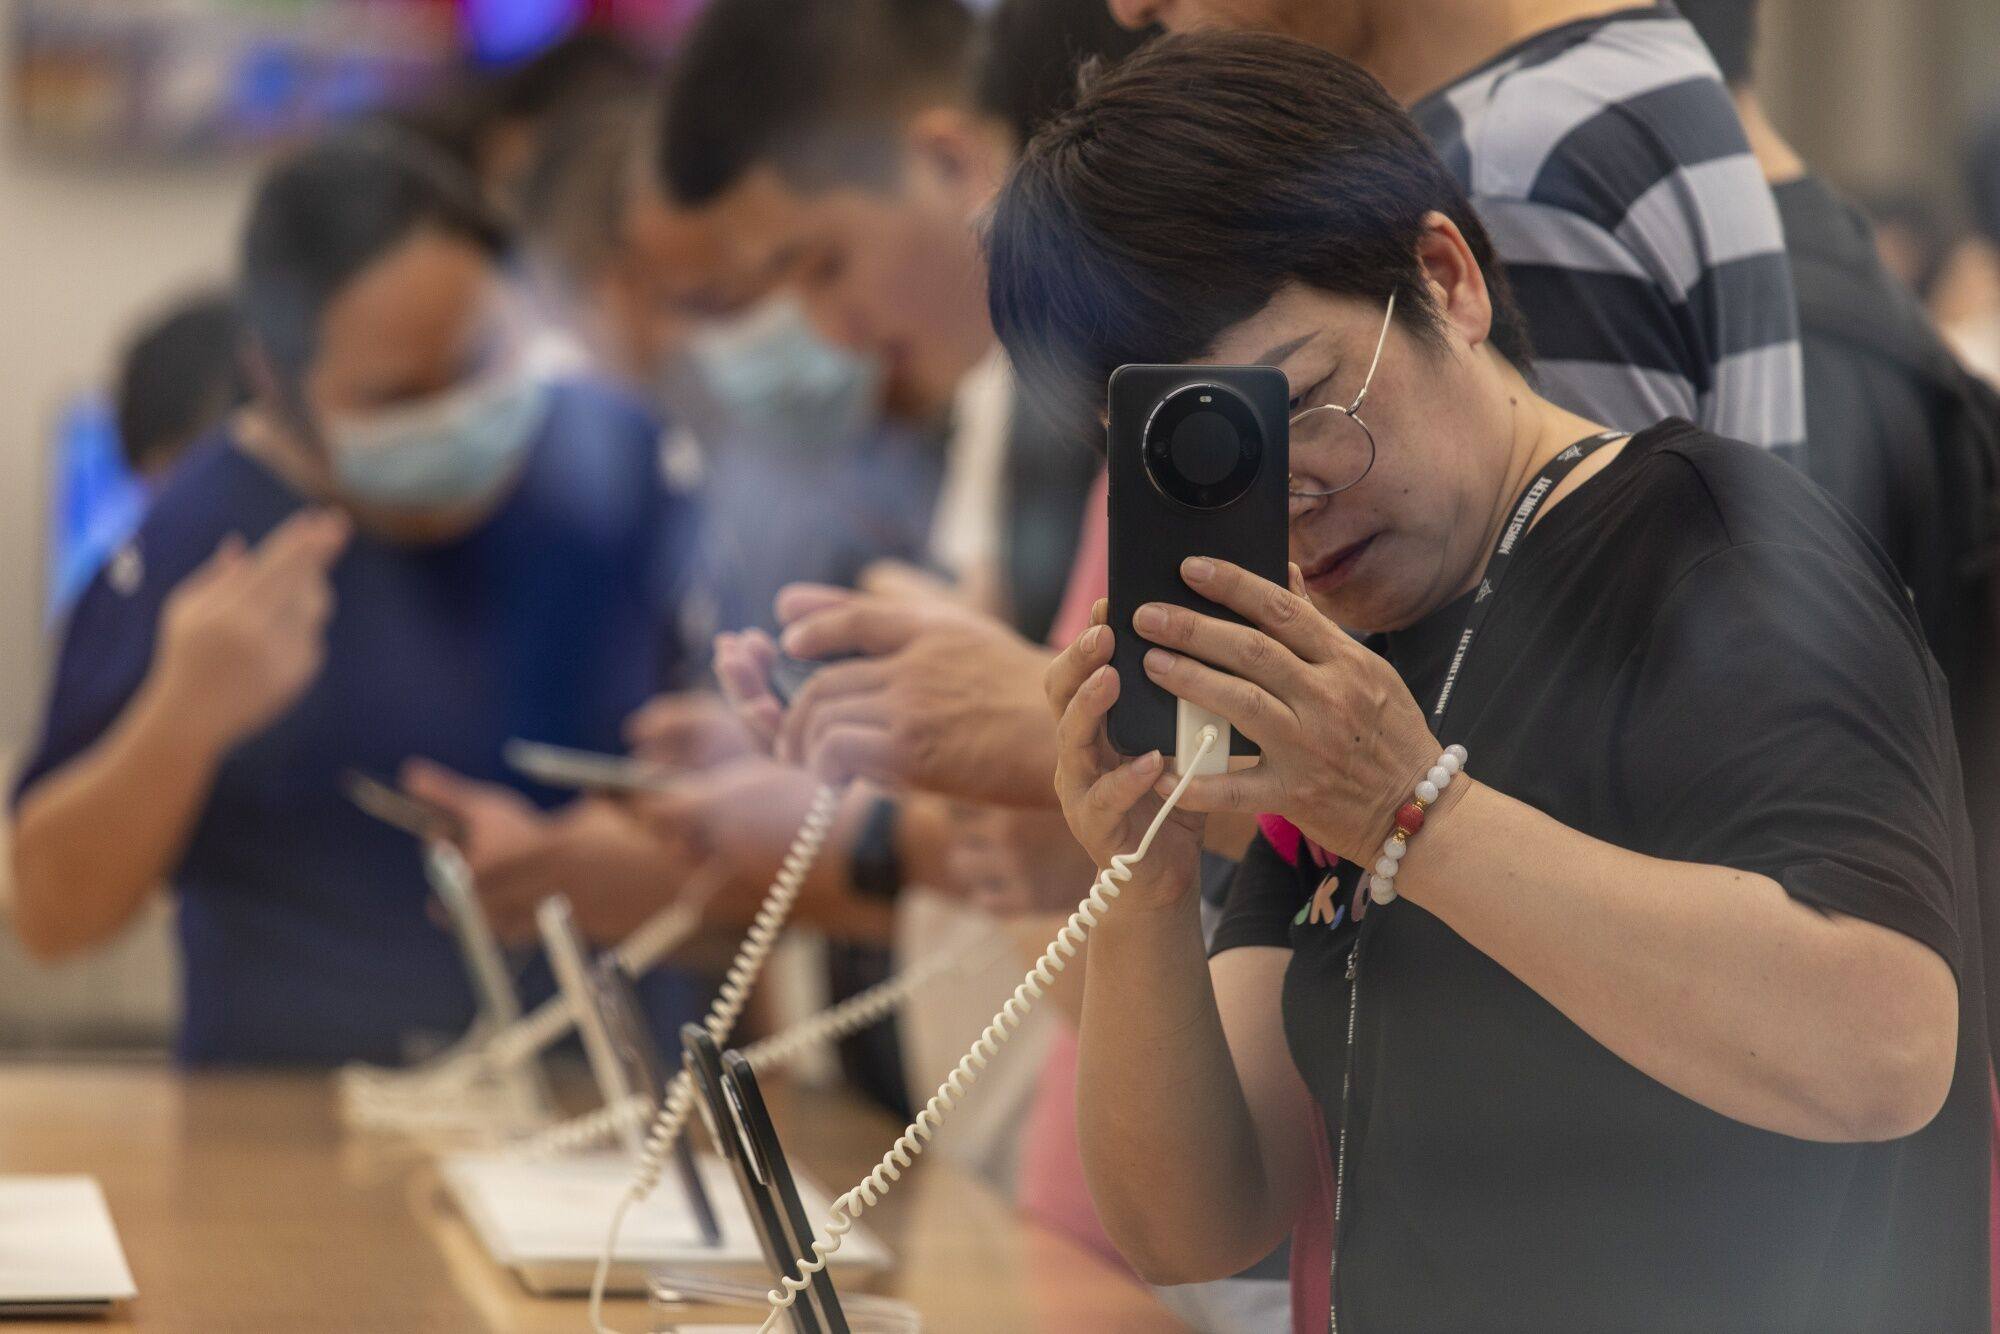 Shoppers try out smartphones on display inside a Huawei Technologies’ store in Shanghai. Photo: Bloomberg